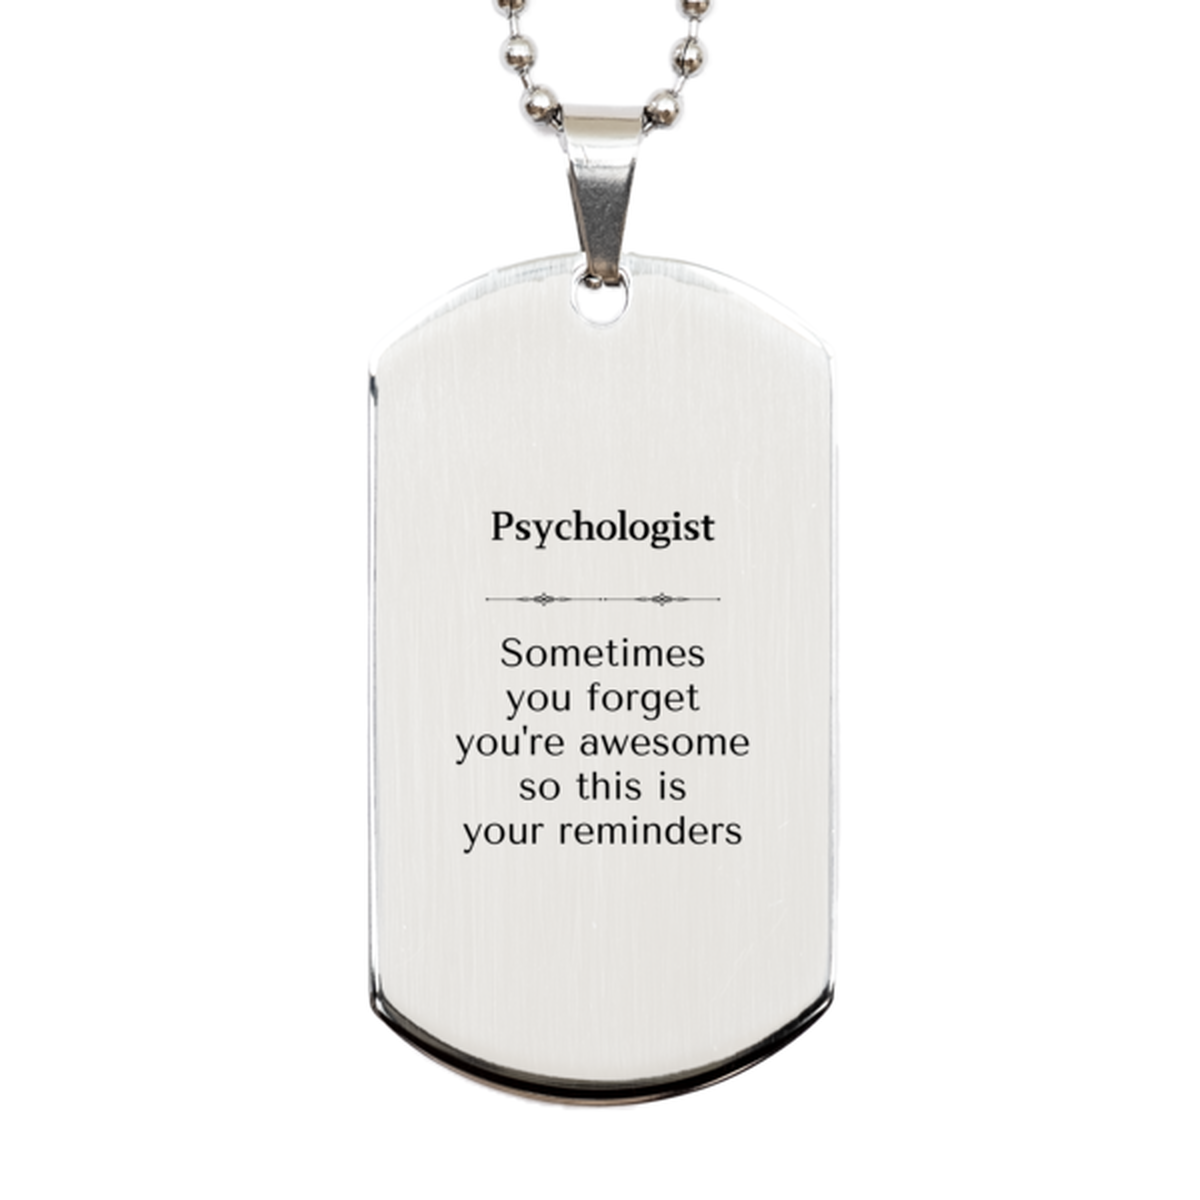 Sentimental Psychologist Silver Dog Tag, Psychologist Sometimes you forget you're awesome so this is your reminders, Graduation Christmas Birthday Gifts for Psychologist, Men, Women, Coworkers